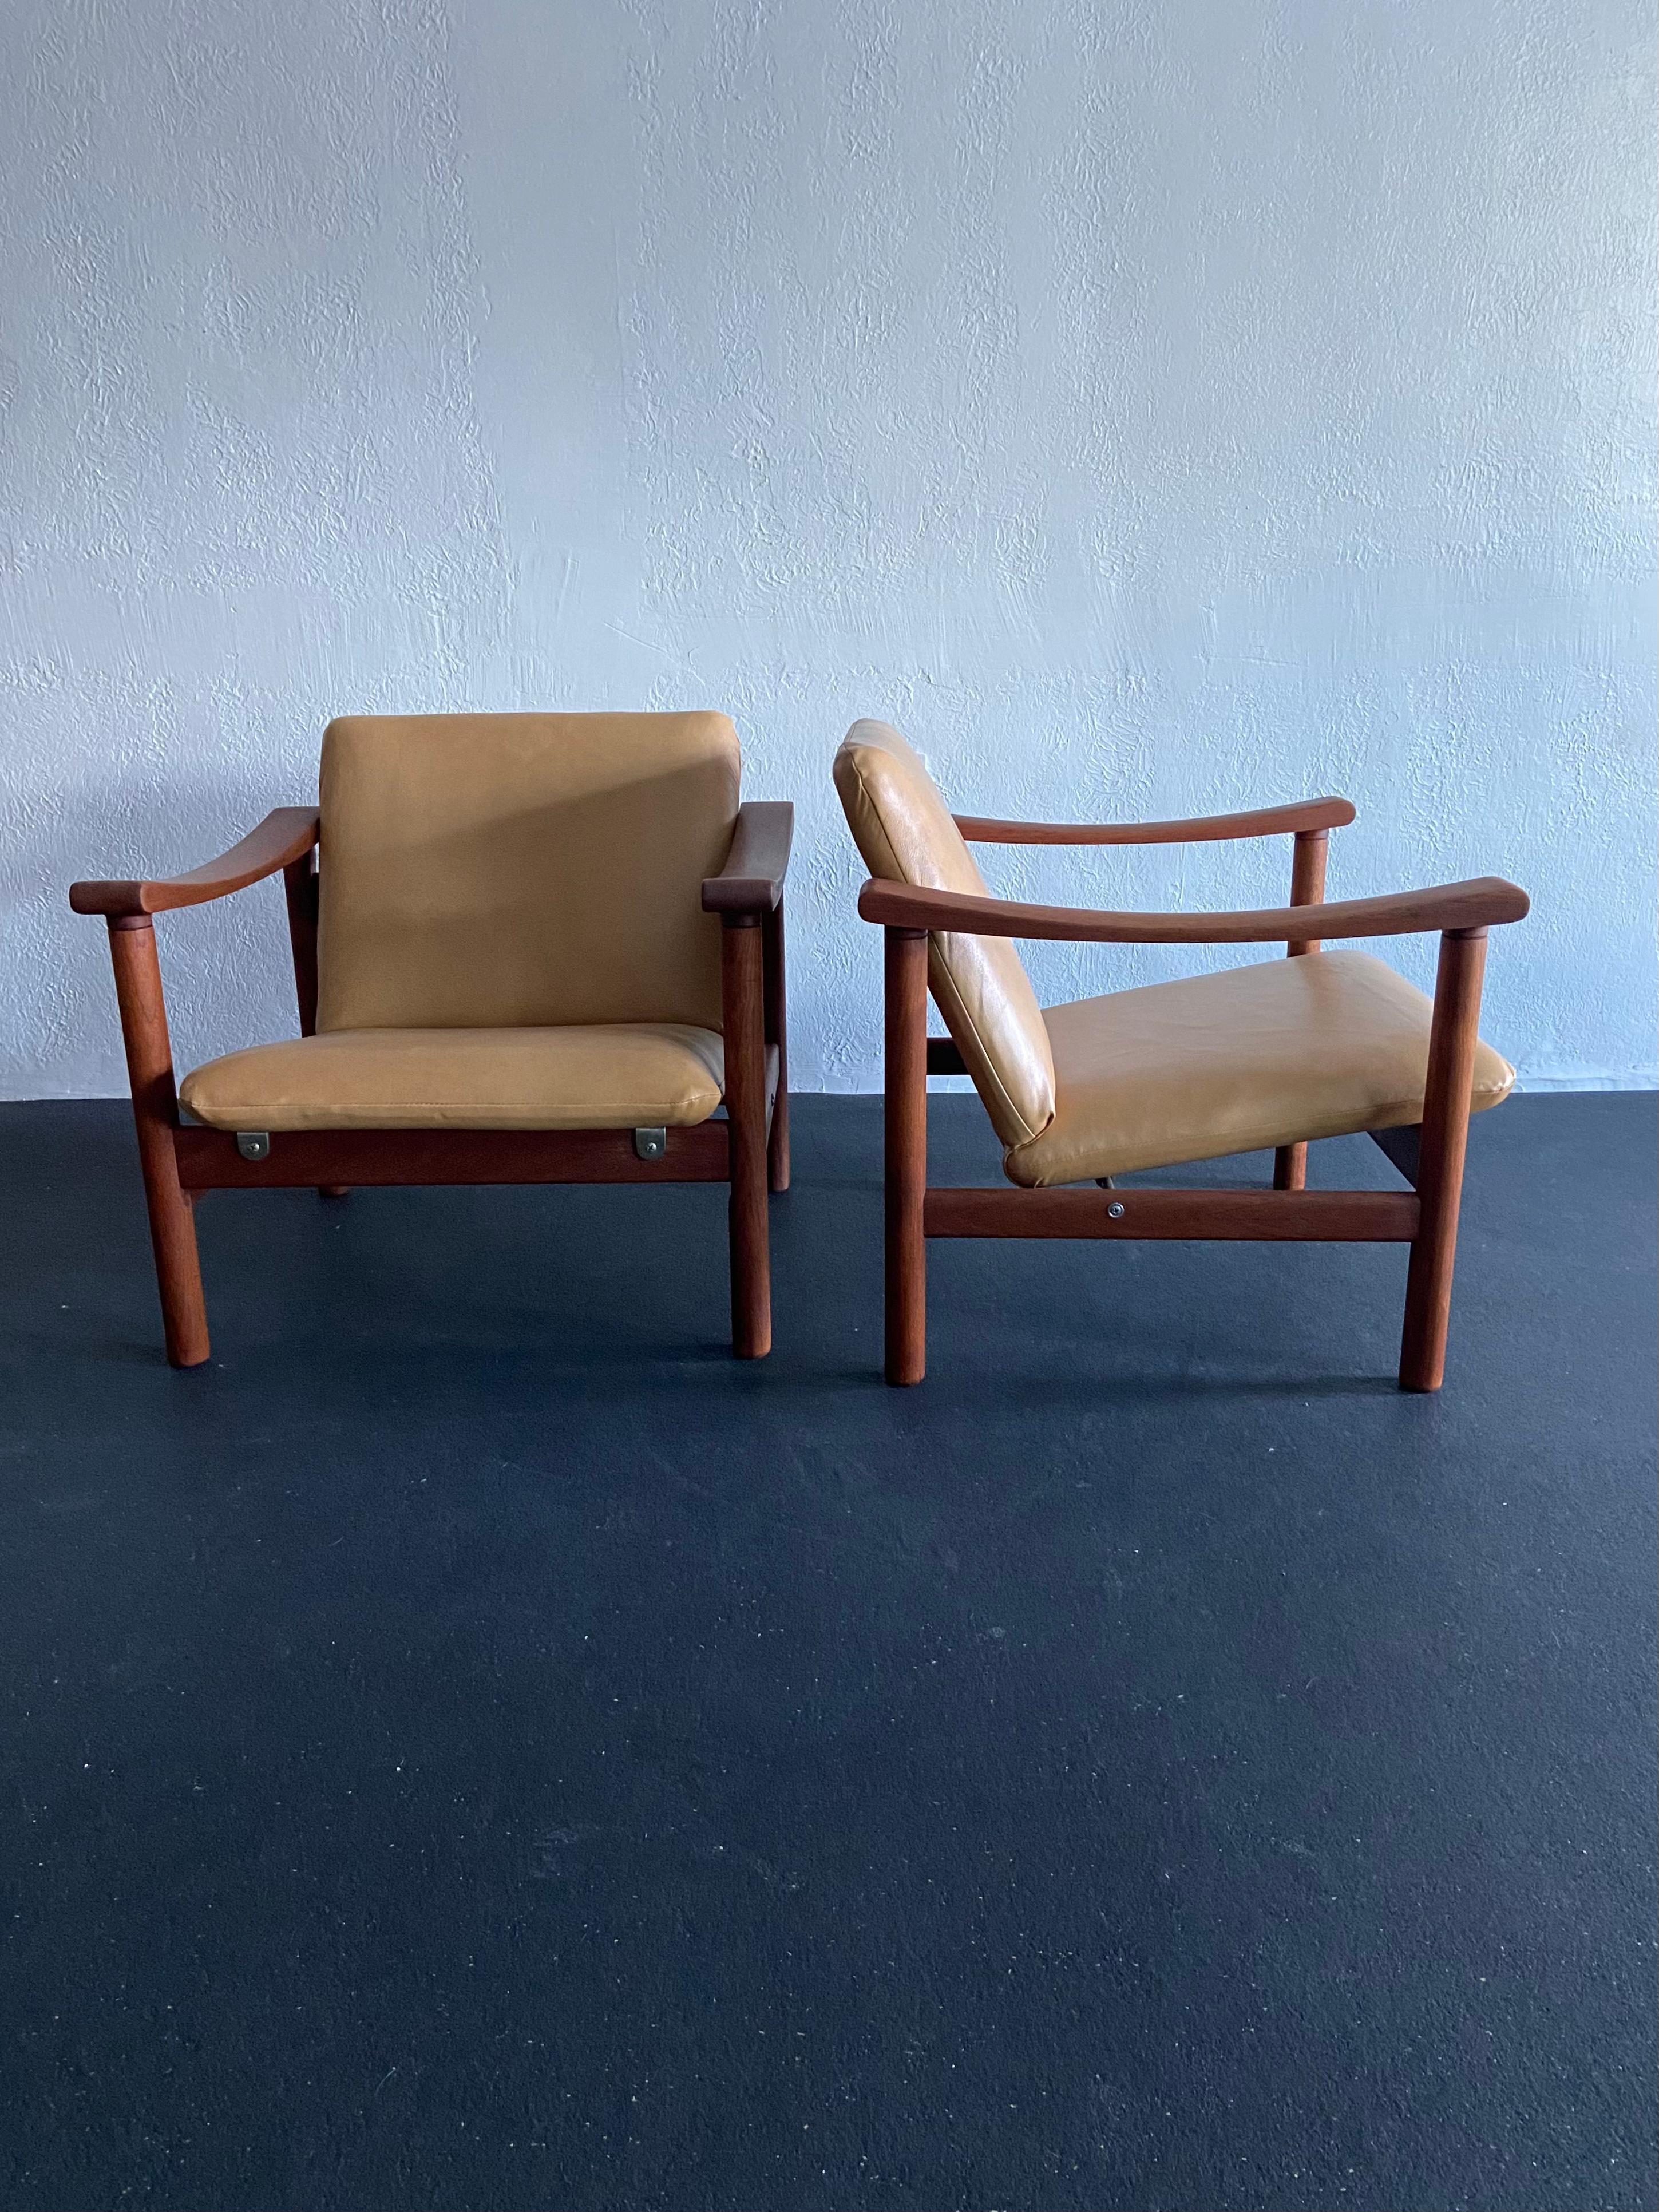 Mid-20th Century Hans Wegner for Getama Leather Lounge Chairs - a Pair For Sale